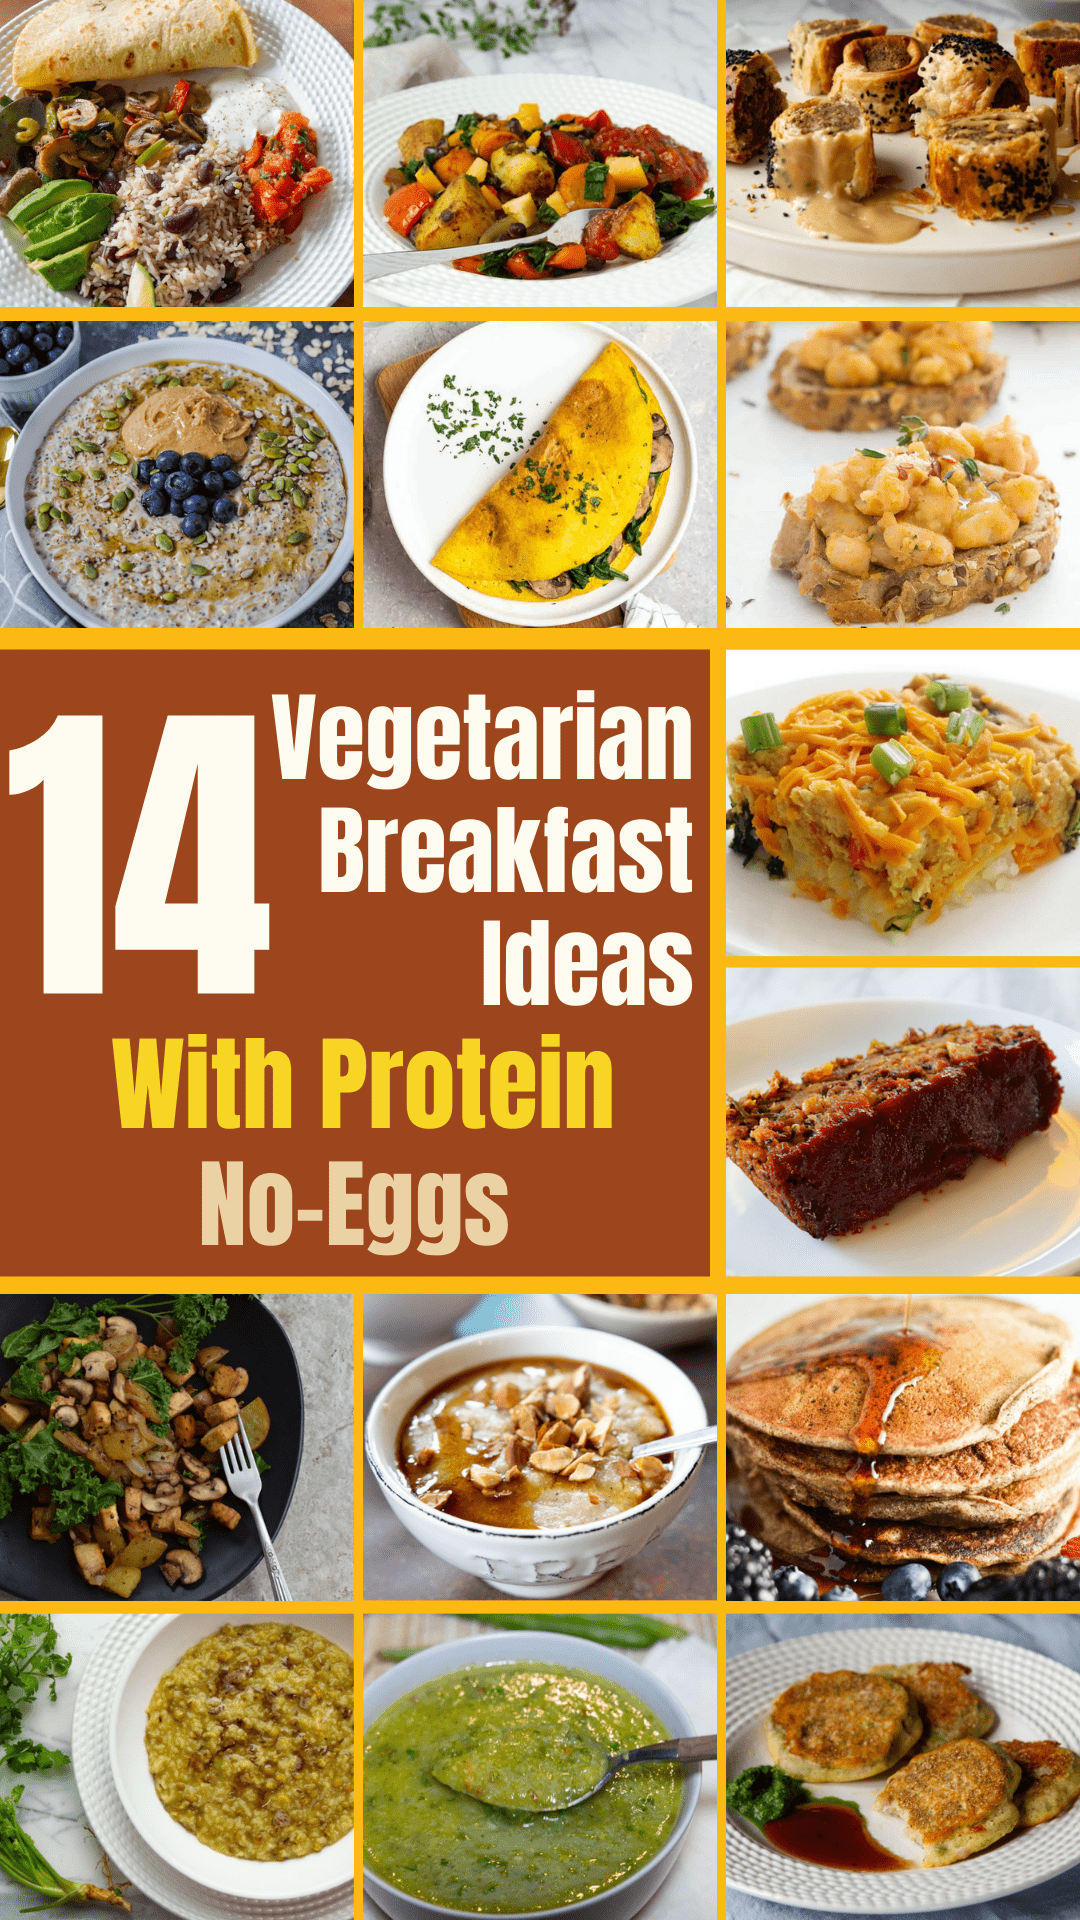 14 Vegetarian Breakfast Ideas with Protein (No Eggs)